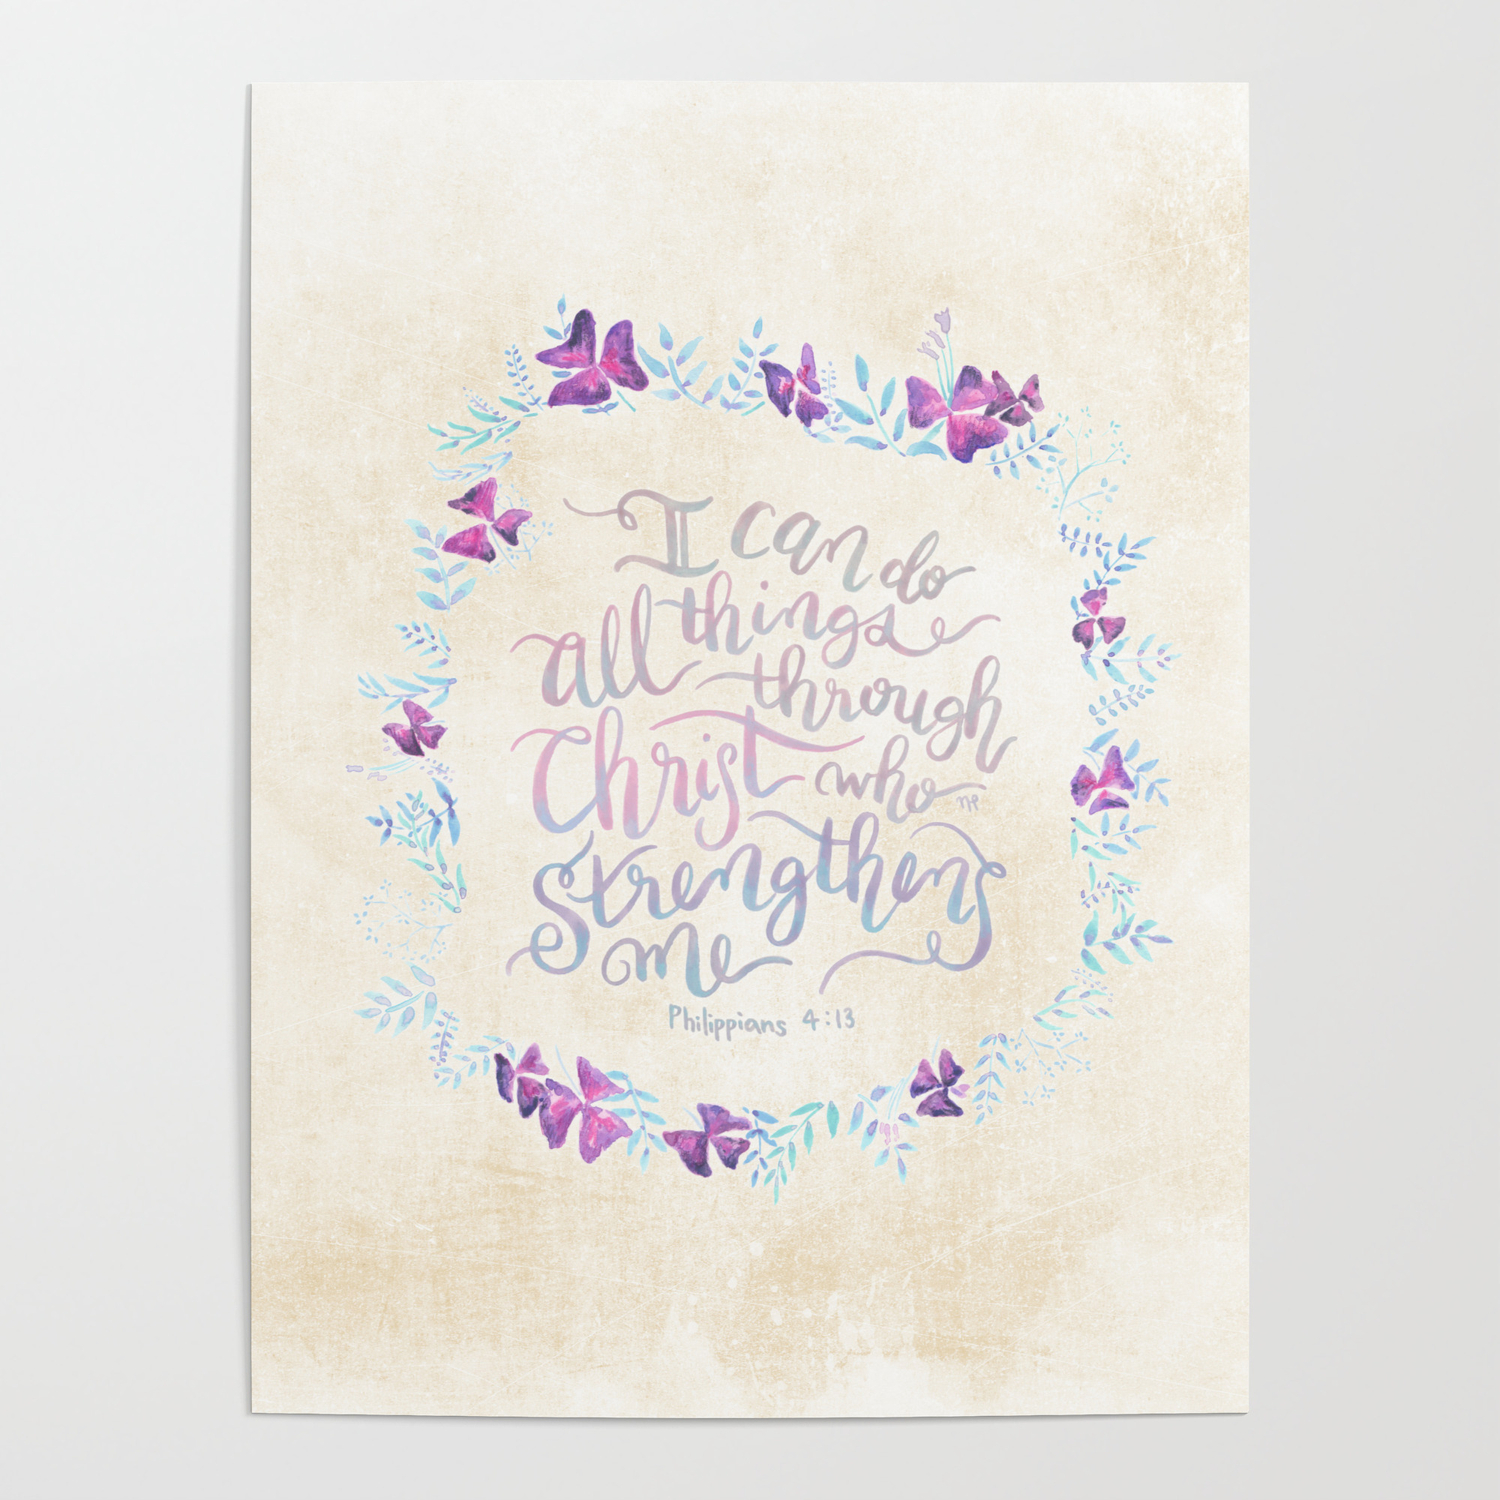 I Can Do All Things - Philippians 4:13 Poster by Joyfultaylor | Society6